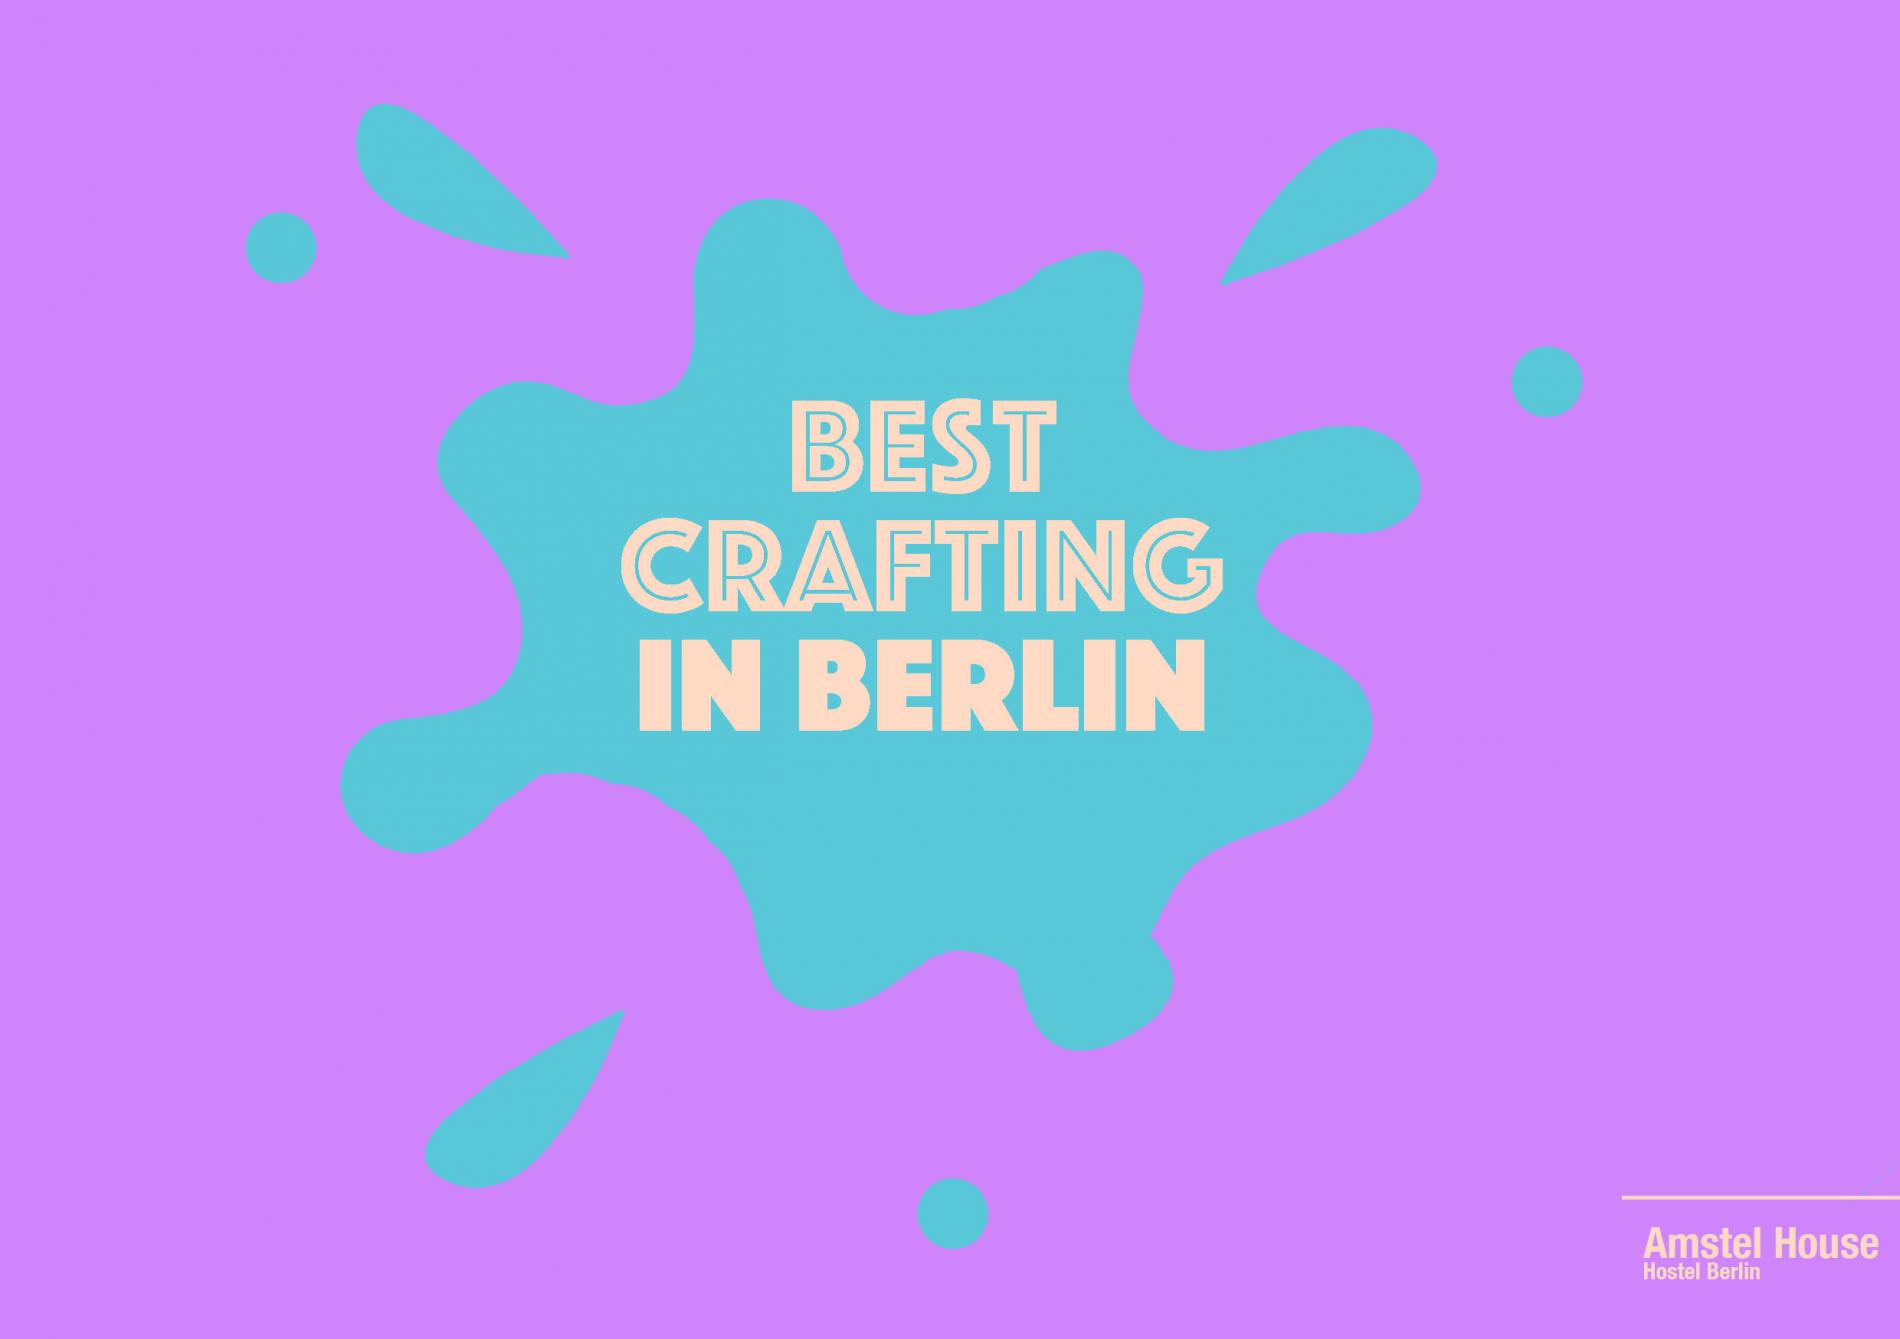 best crafting in berlin - art shops and creative classes